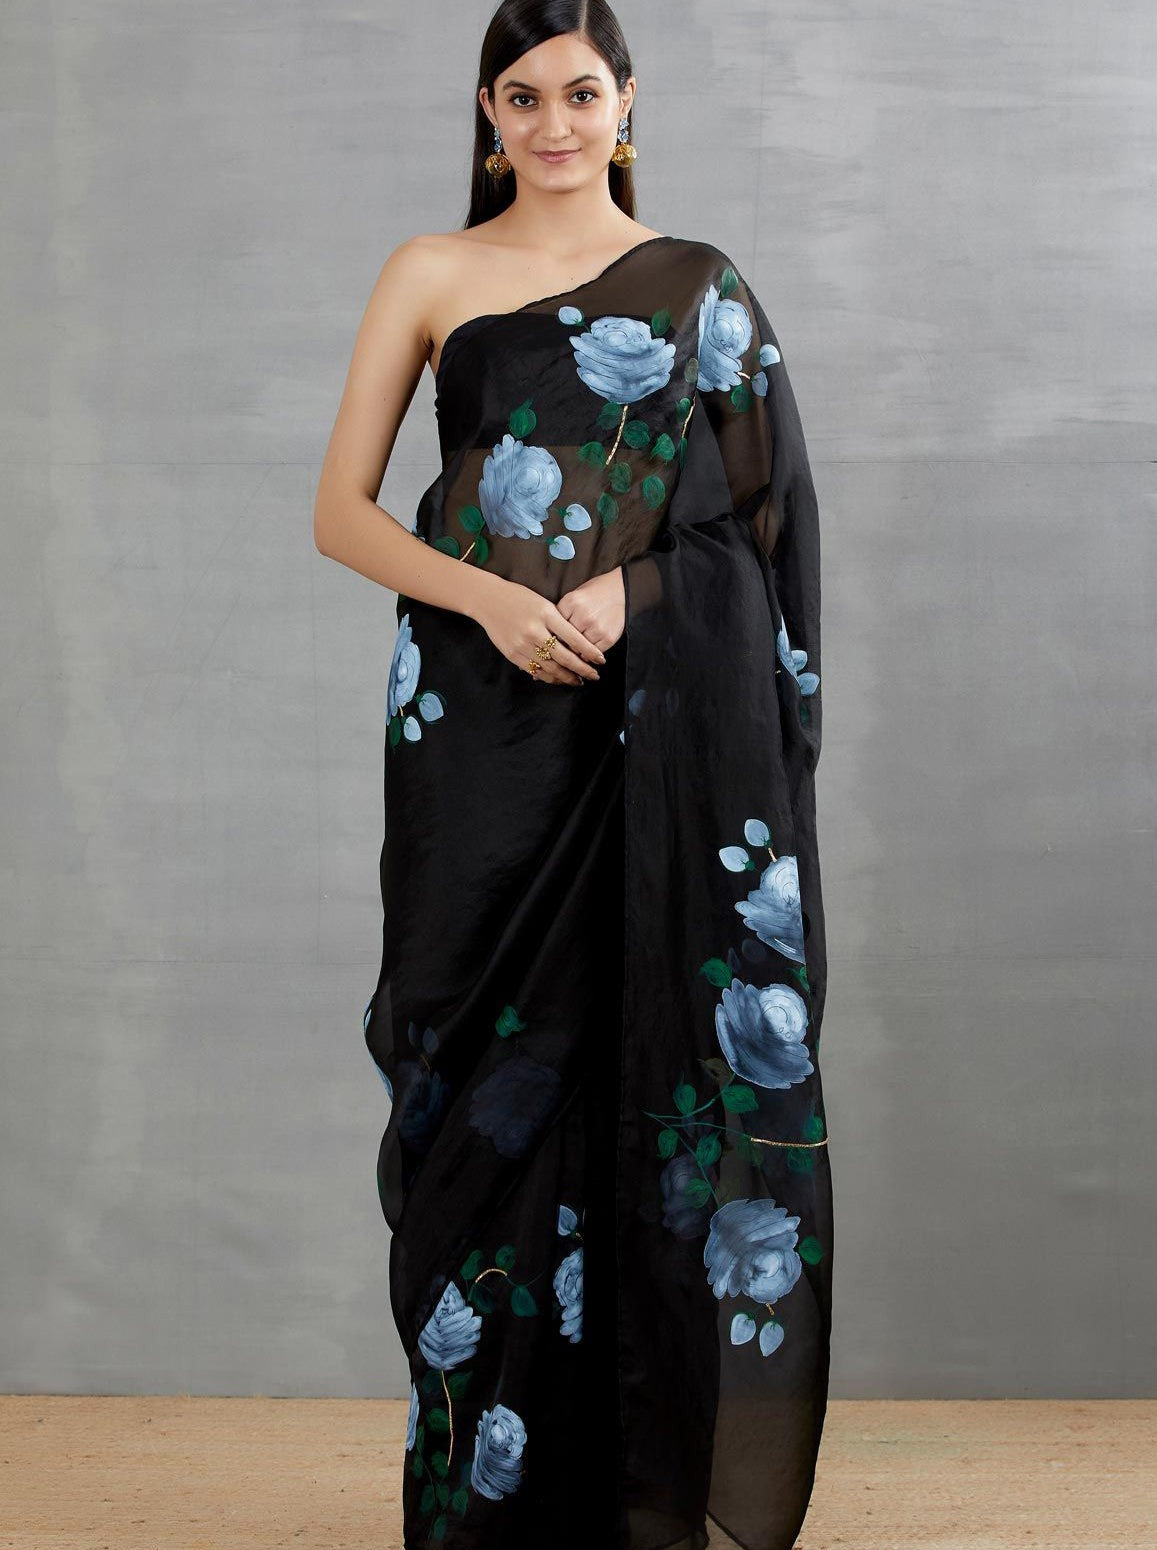 White Roses On Black Organza Saree – BLACK SAREE LOOK FOR PARTY